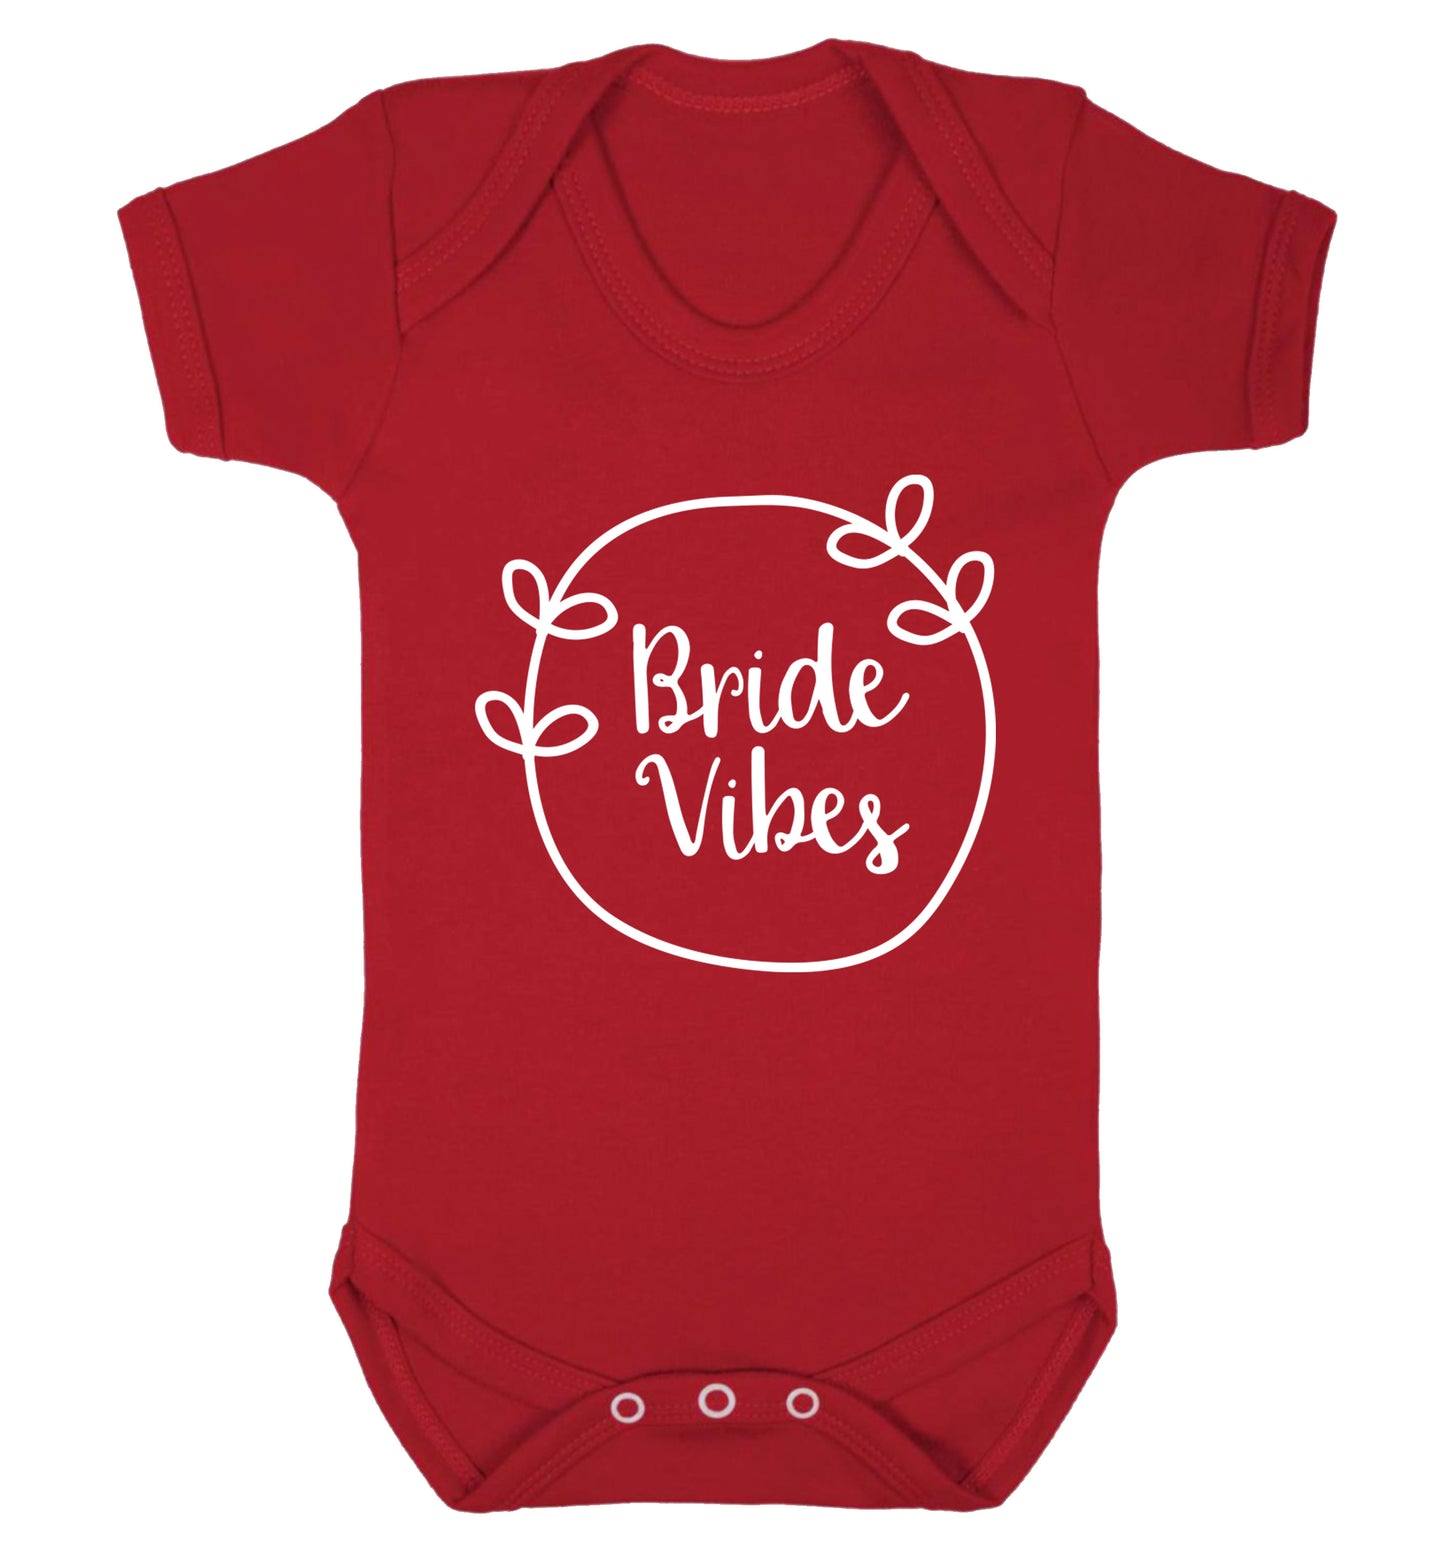 Bride Vibes Baby Vest red 18-24 months